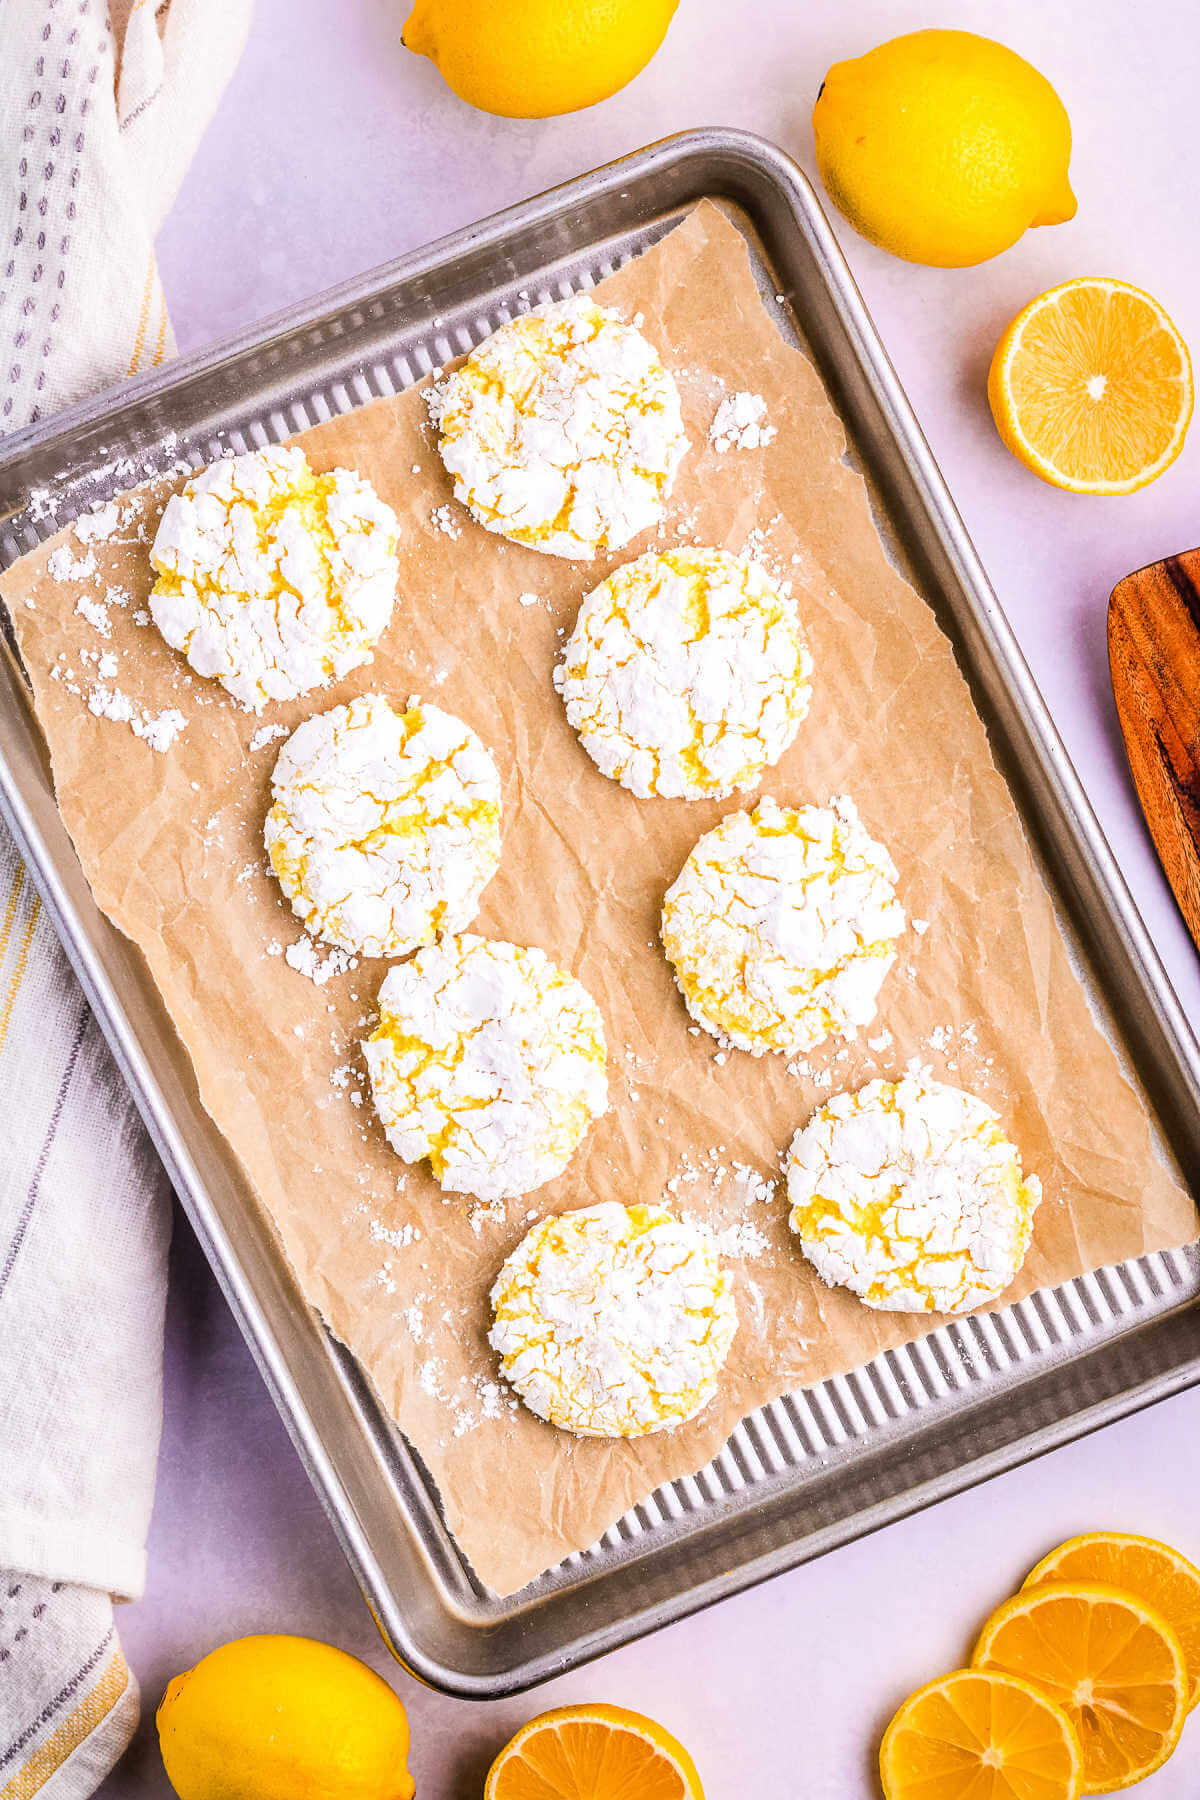 baked lemon crinkle cookies on a baking sheet on a table with lemons.